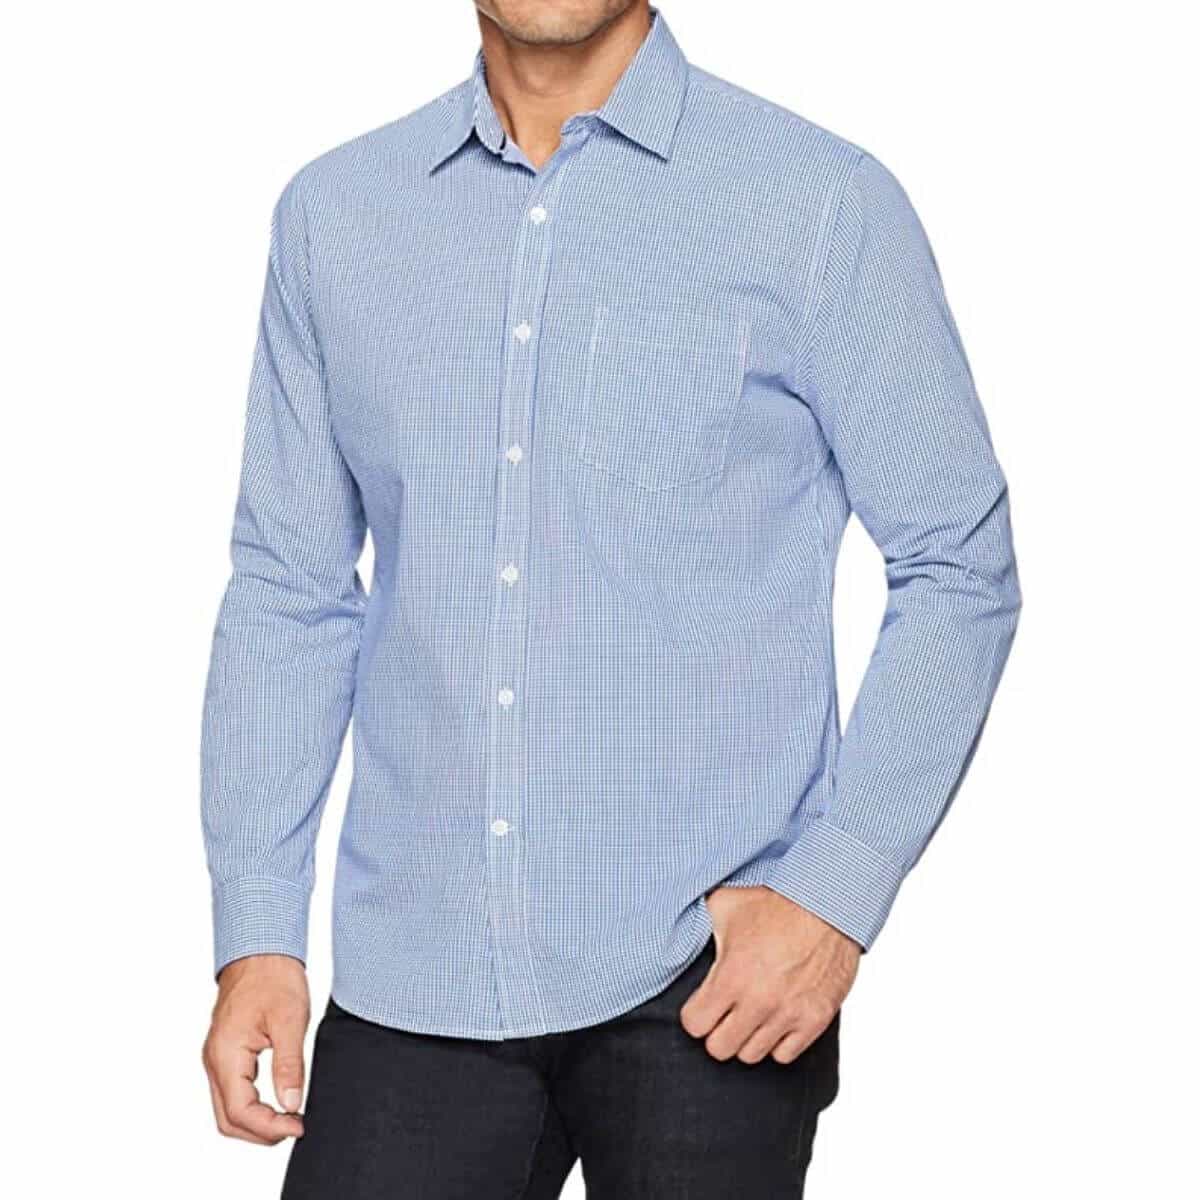 Top half of a person wearing a blue gingham shirt and dark jeans.